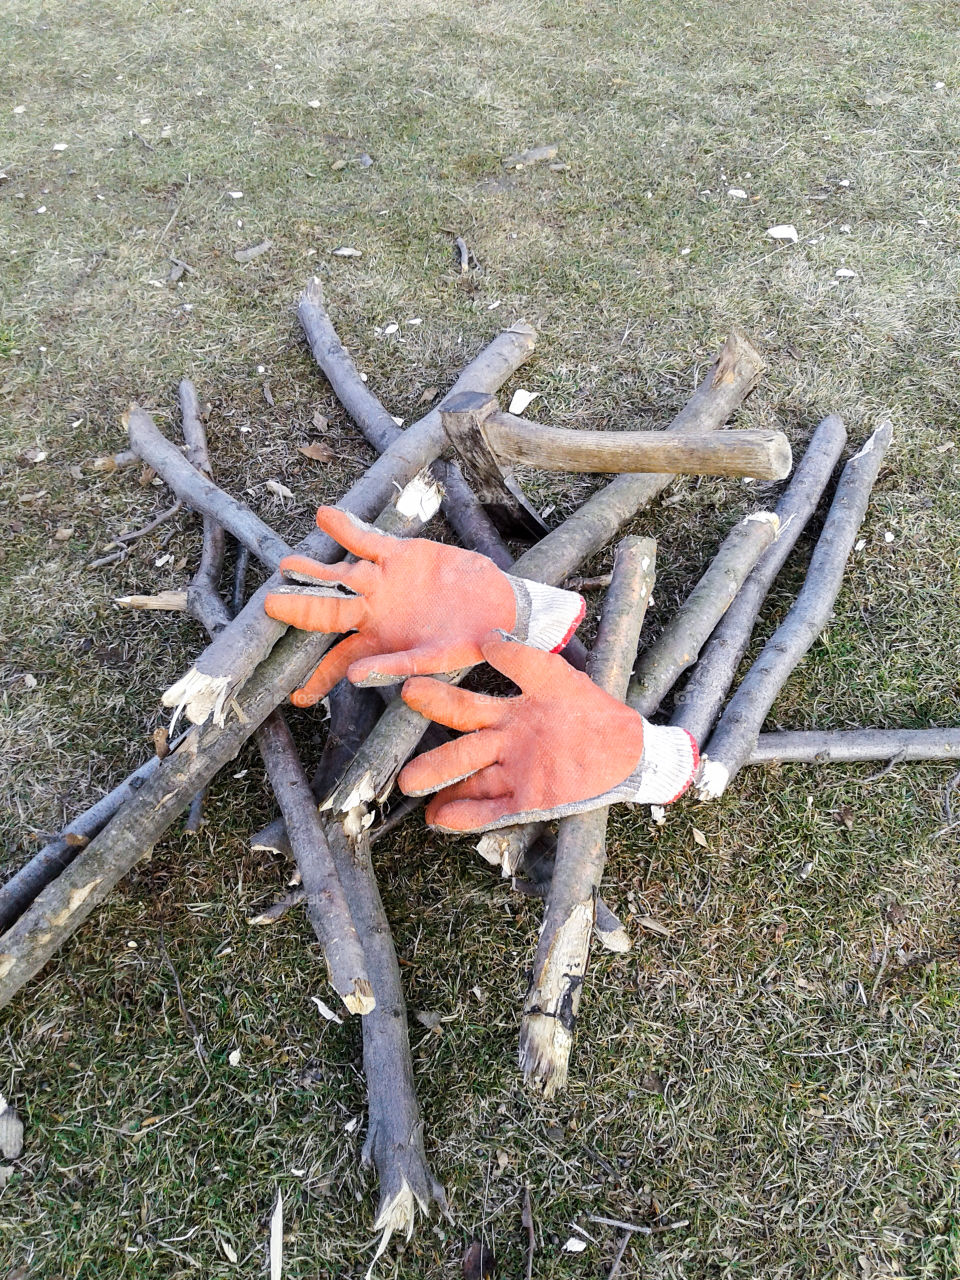 pairs of glowes,hatchet axe,and of course there are some wood to set a wonderfull camp fire...